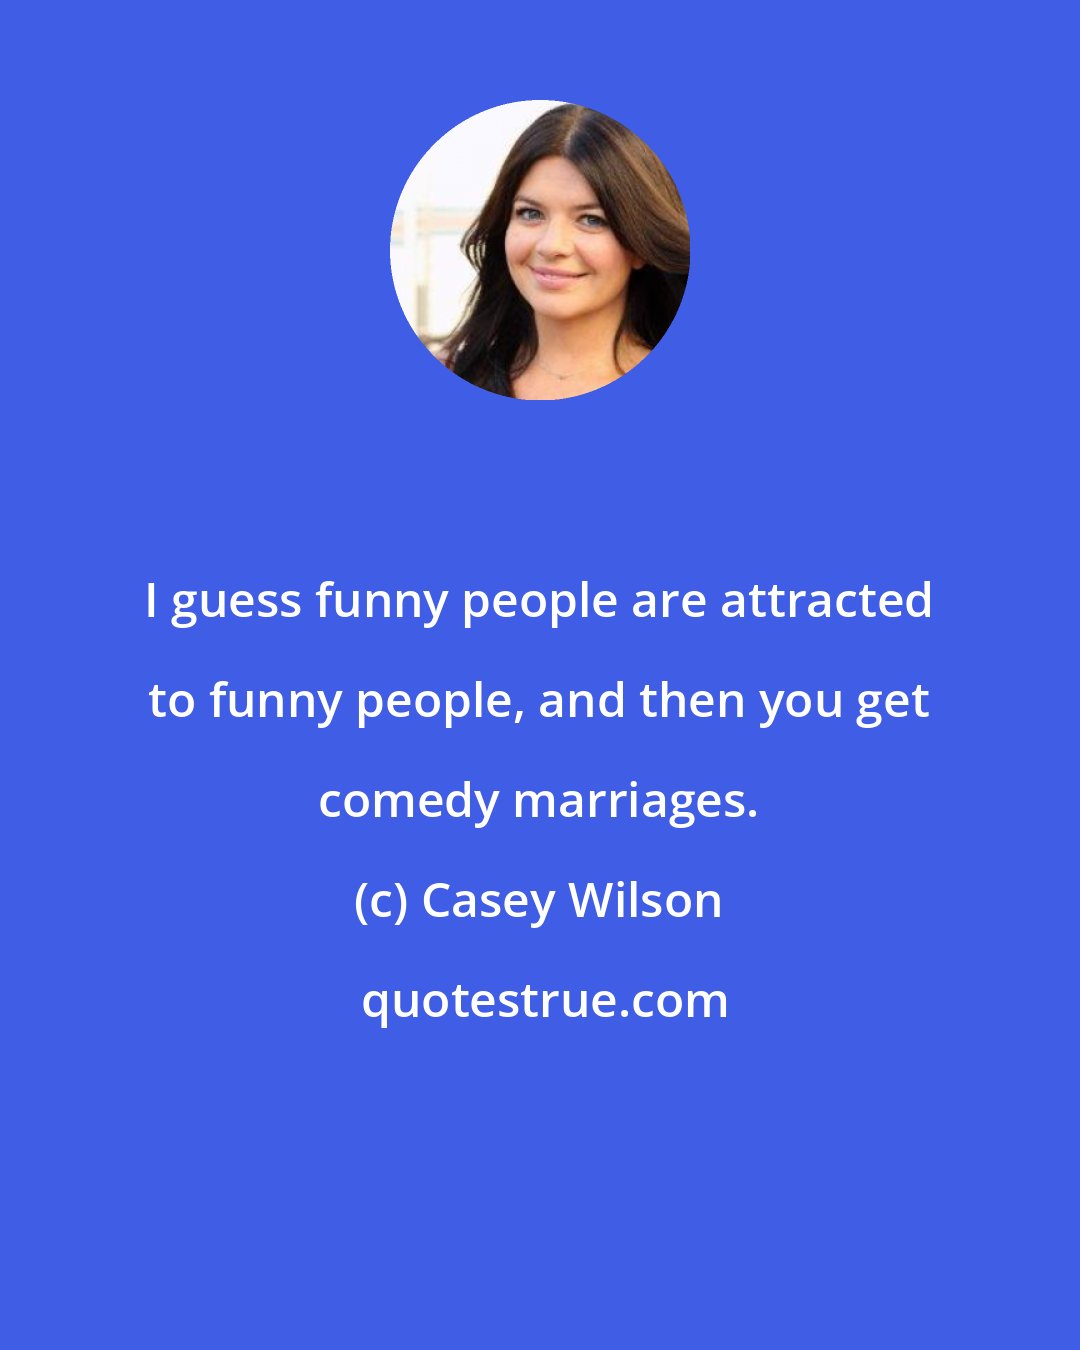 Casey Wilson: I guess funny people are attracted to funny people, and then you get comedy marriages.